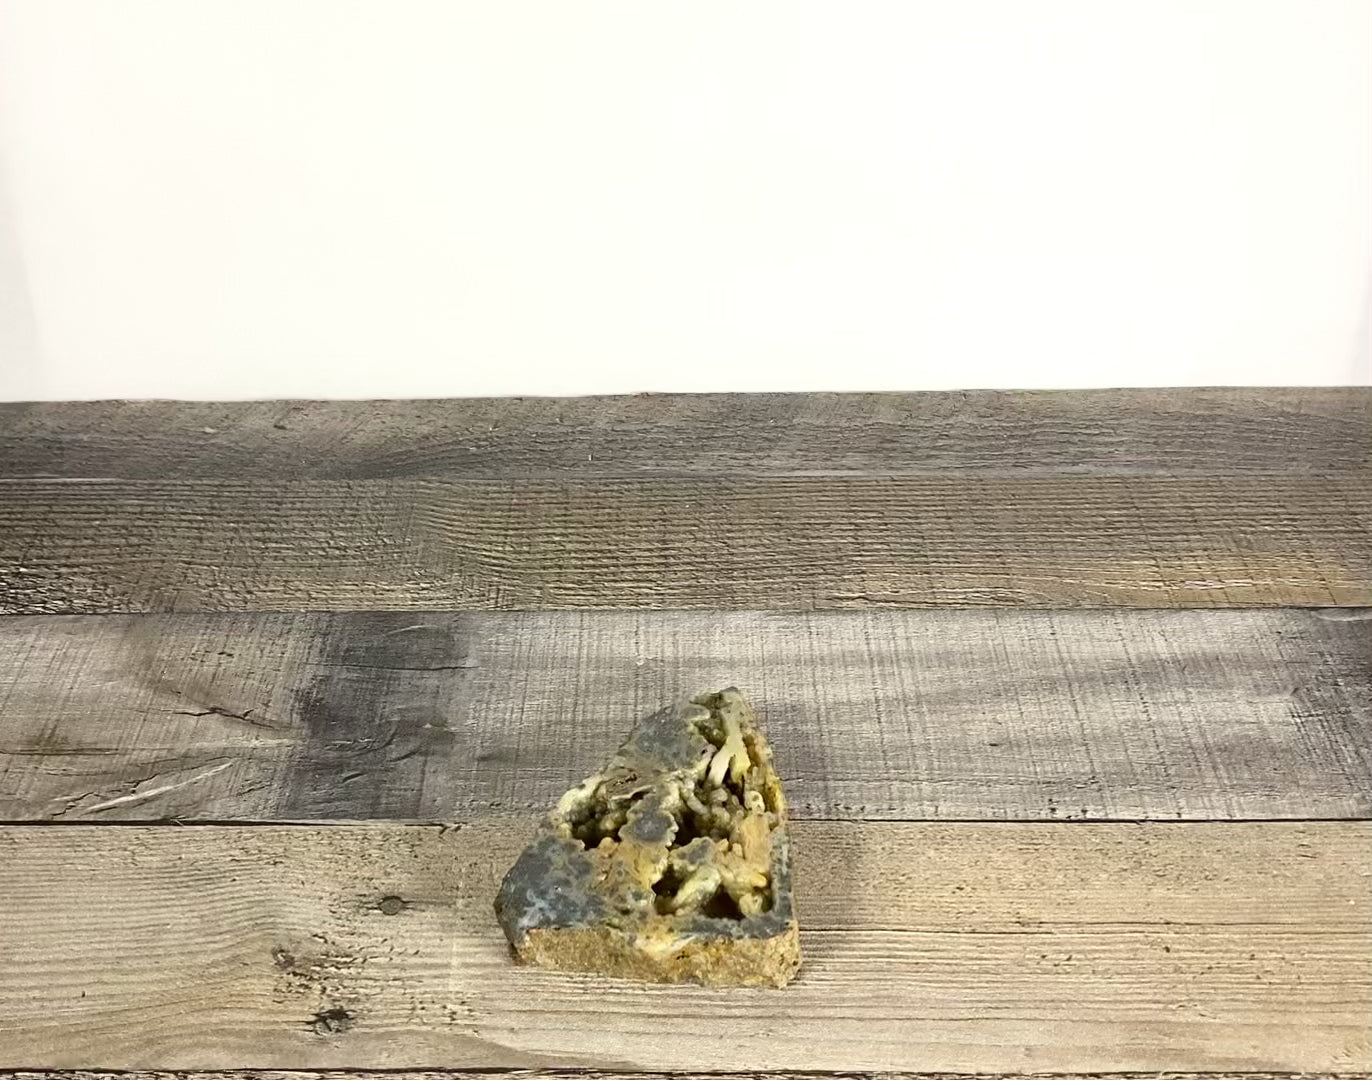 Pyrite Flower Agate Slab with Botryoidal Elements - Video